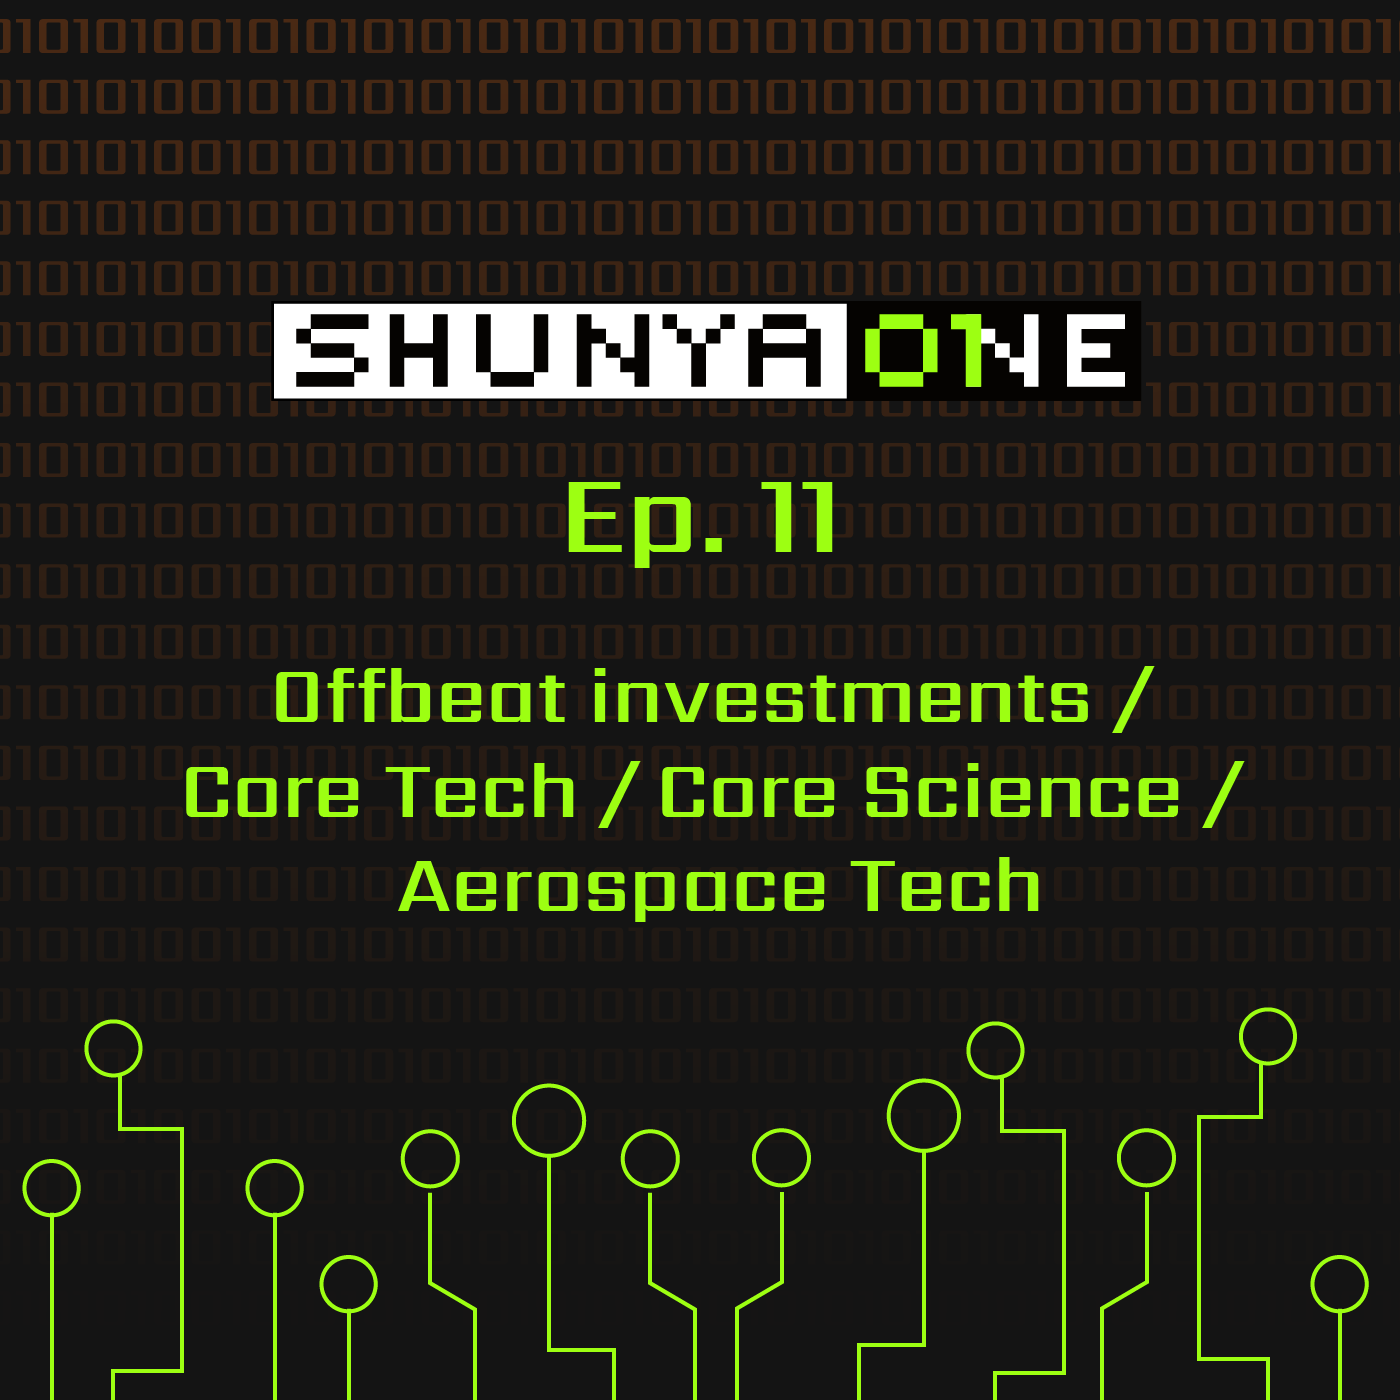 Feat. Kris Nair: Offbeat investments / Core Tech / Core Science / Aerospace Tech